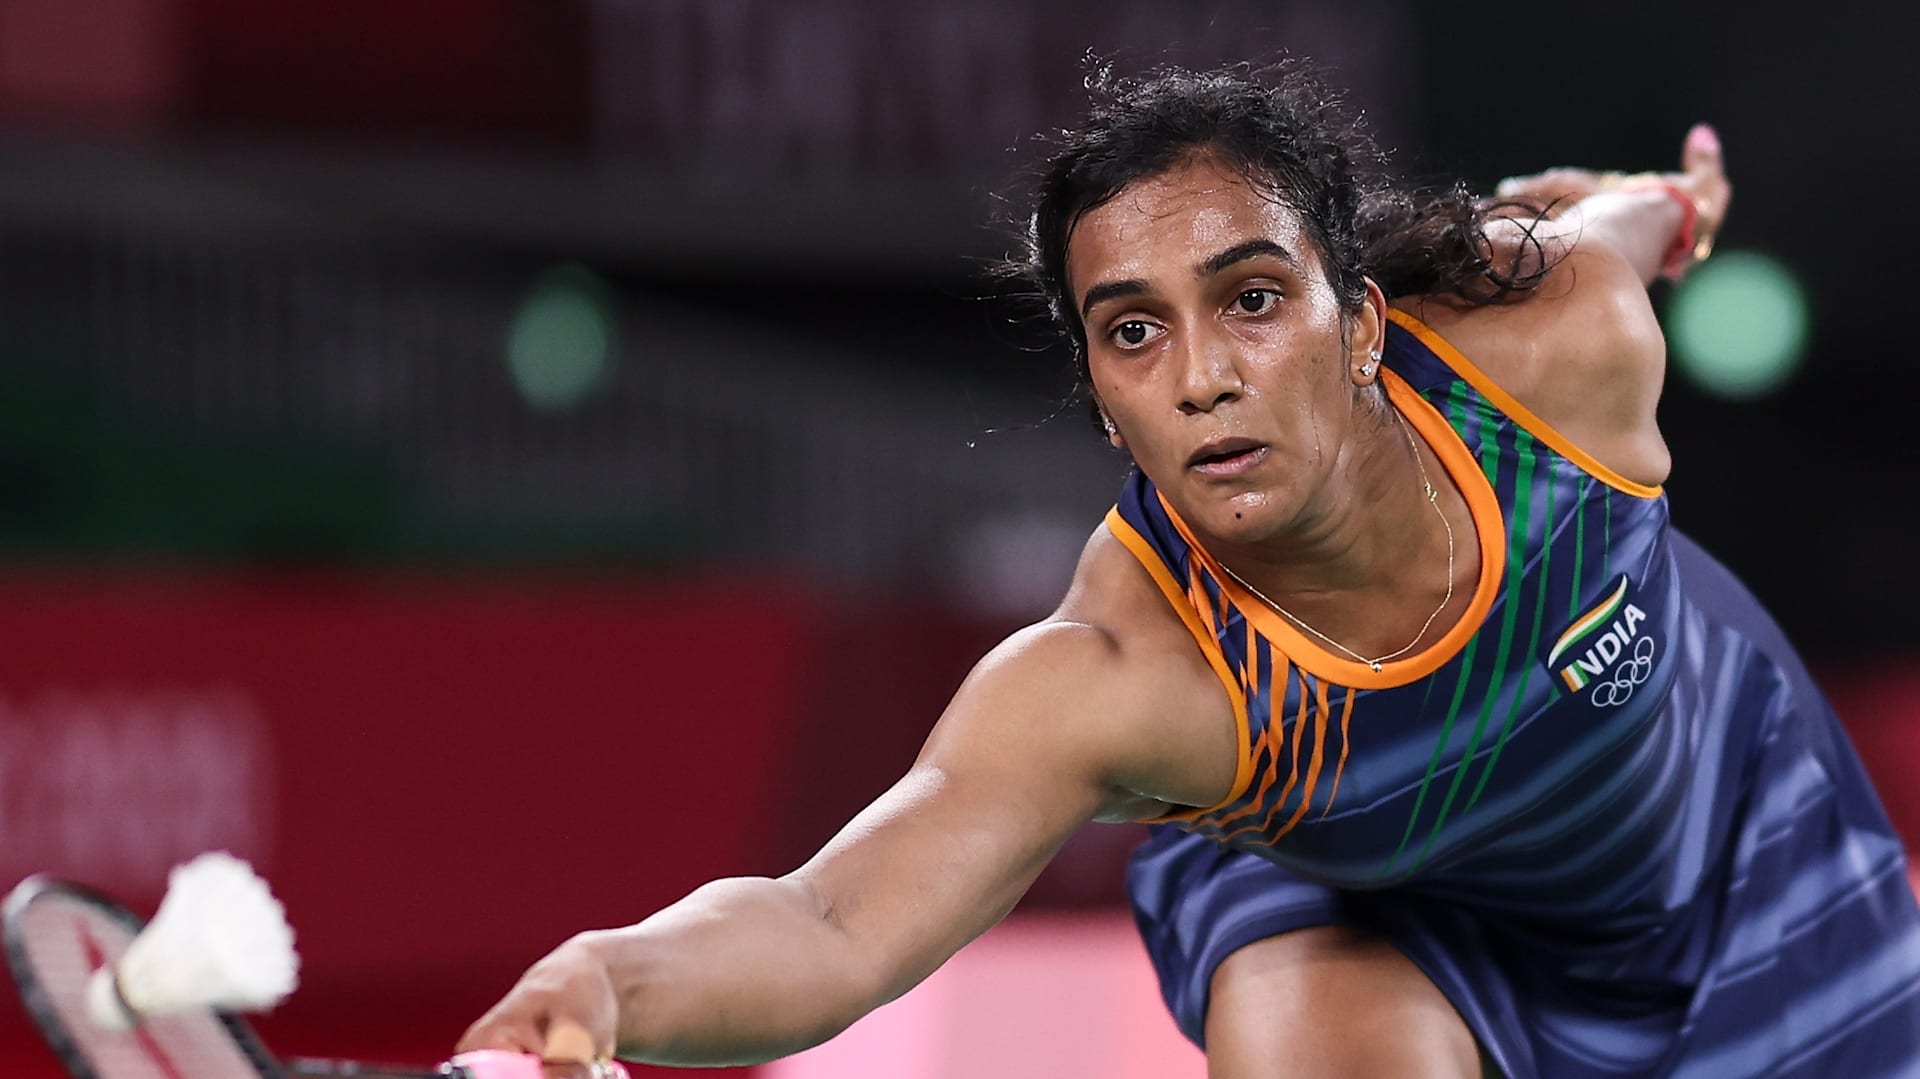 pv sindhu match today live streaming on which channel